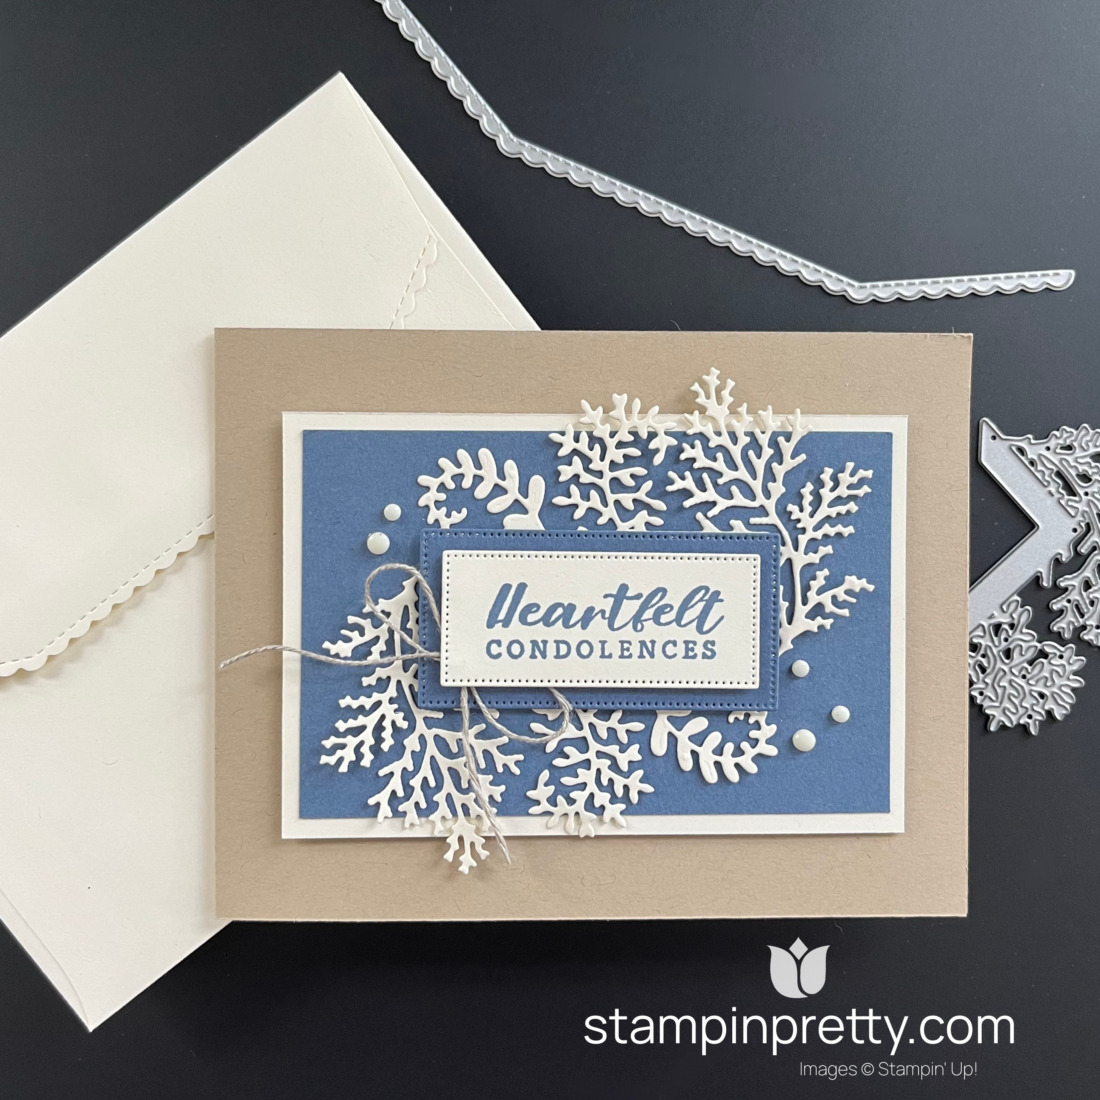 Create a Classy Sympathy Card with Wild Ferns Bundle from Stampin' Up! Card by Mary Fish, Stampin' Pretty